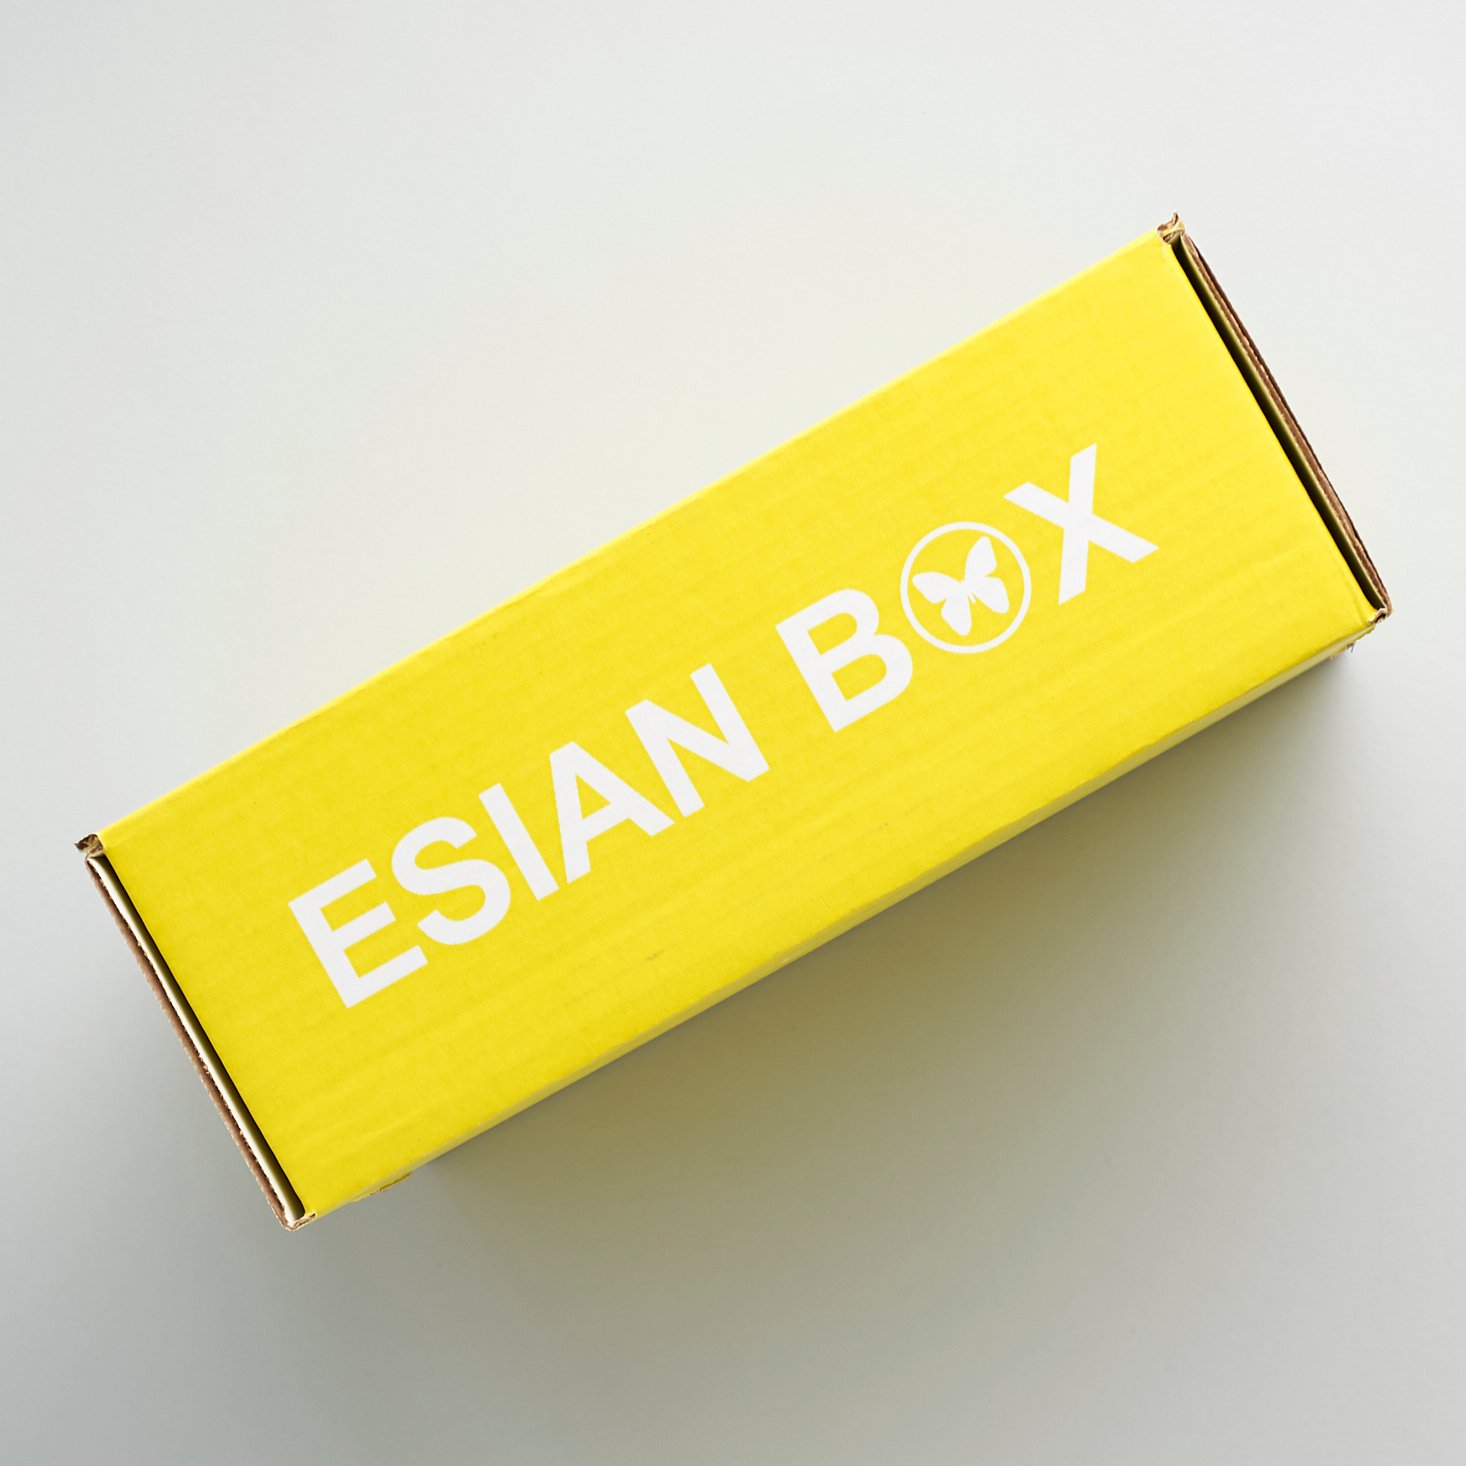 Check out our review of the February 2017 EsianMall Snack box!